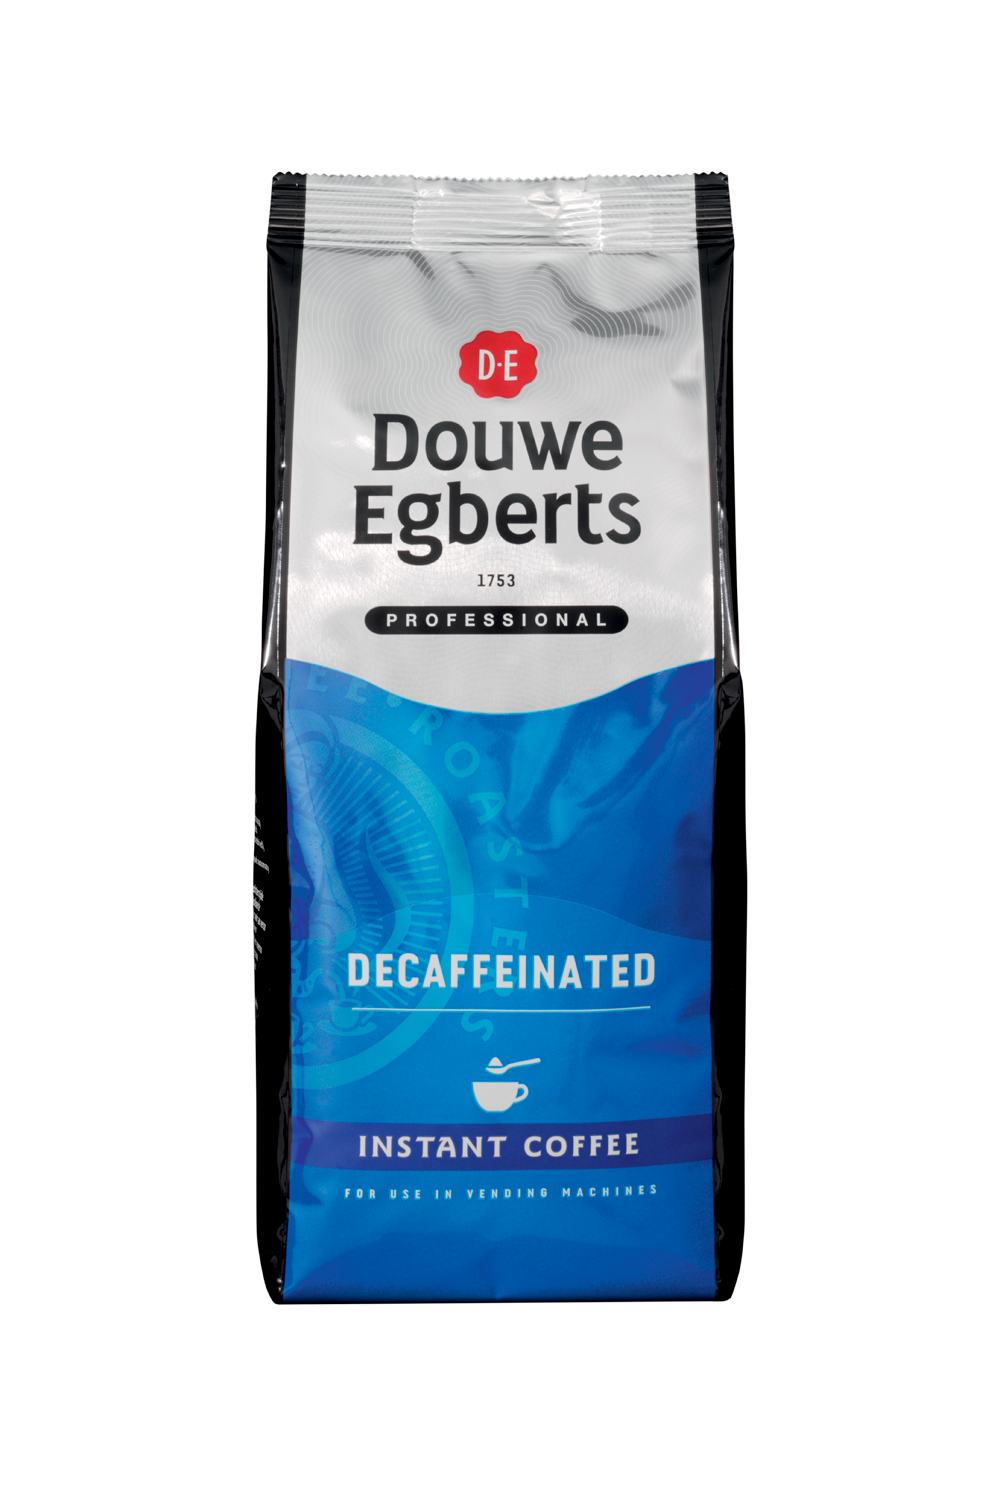 Douwe Egberts Decaf instant coffee 300g. For use through vending machines as a refill